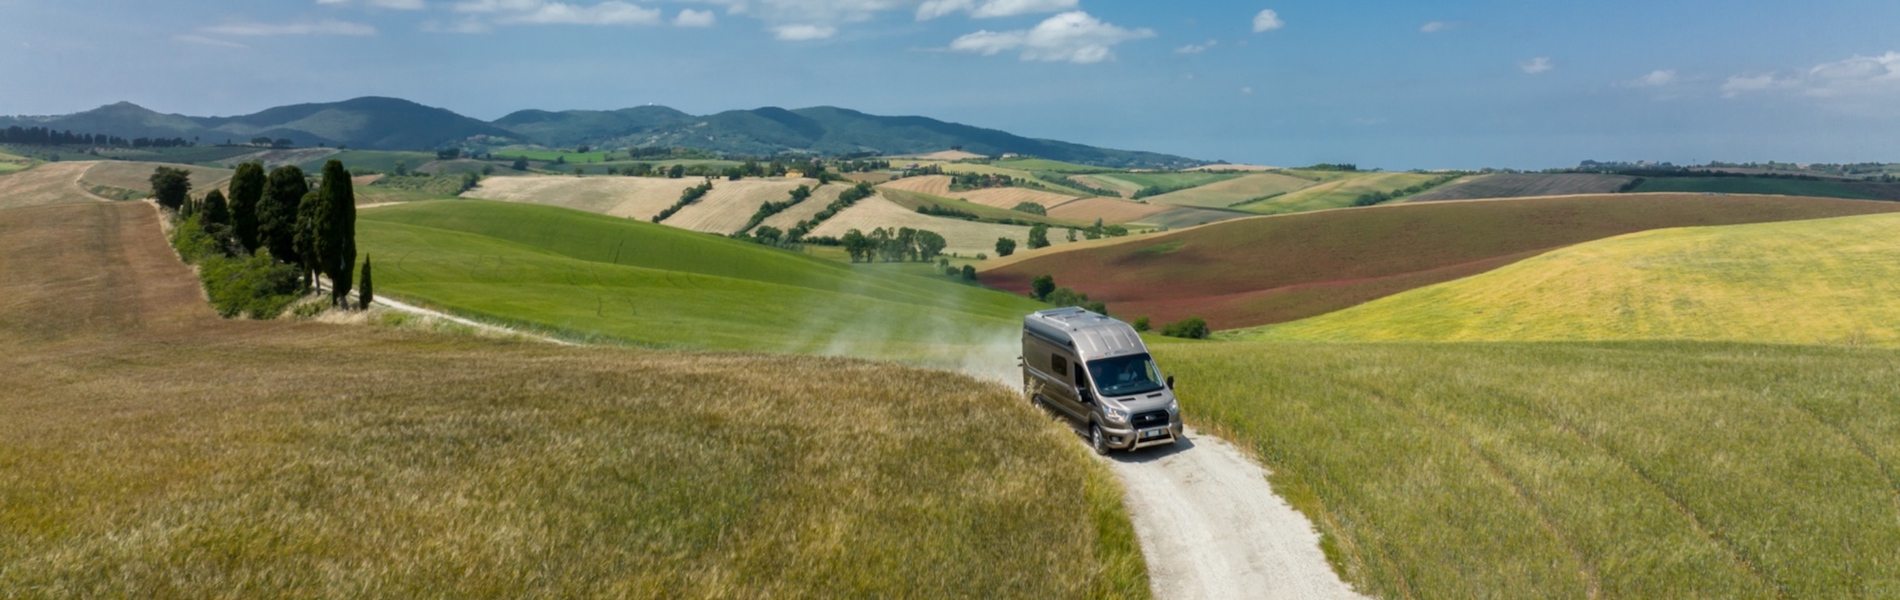 Traveling in Tuscany by camper